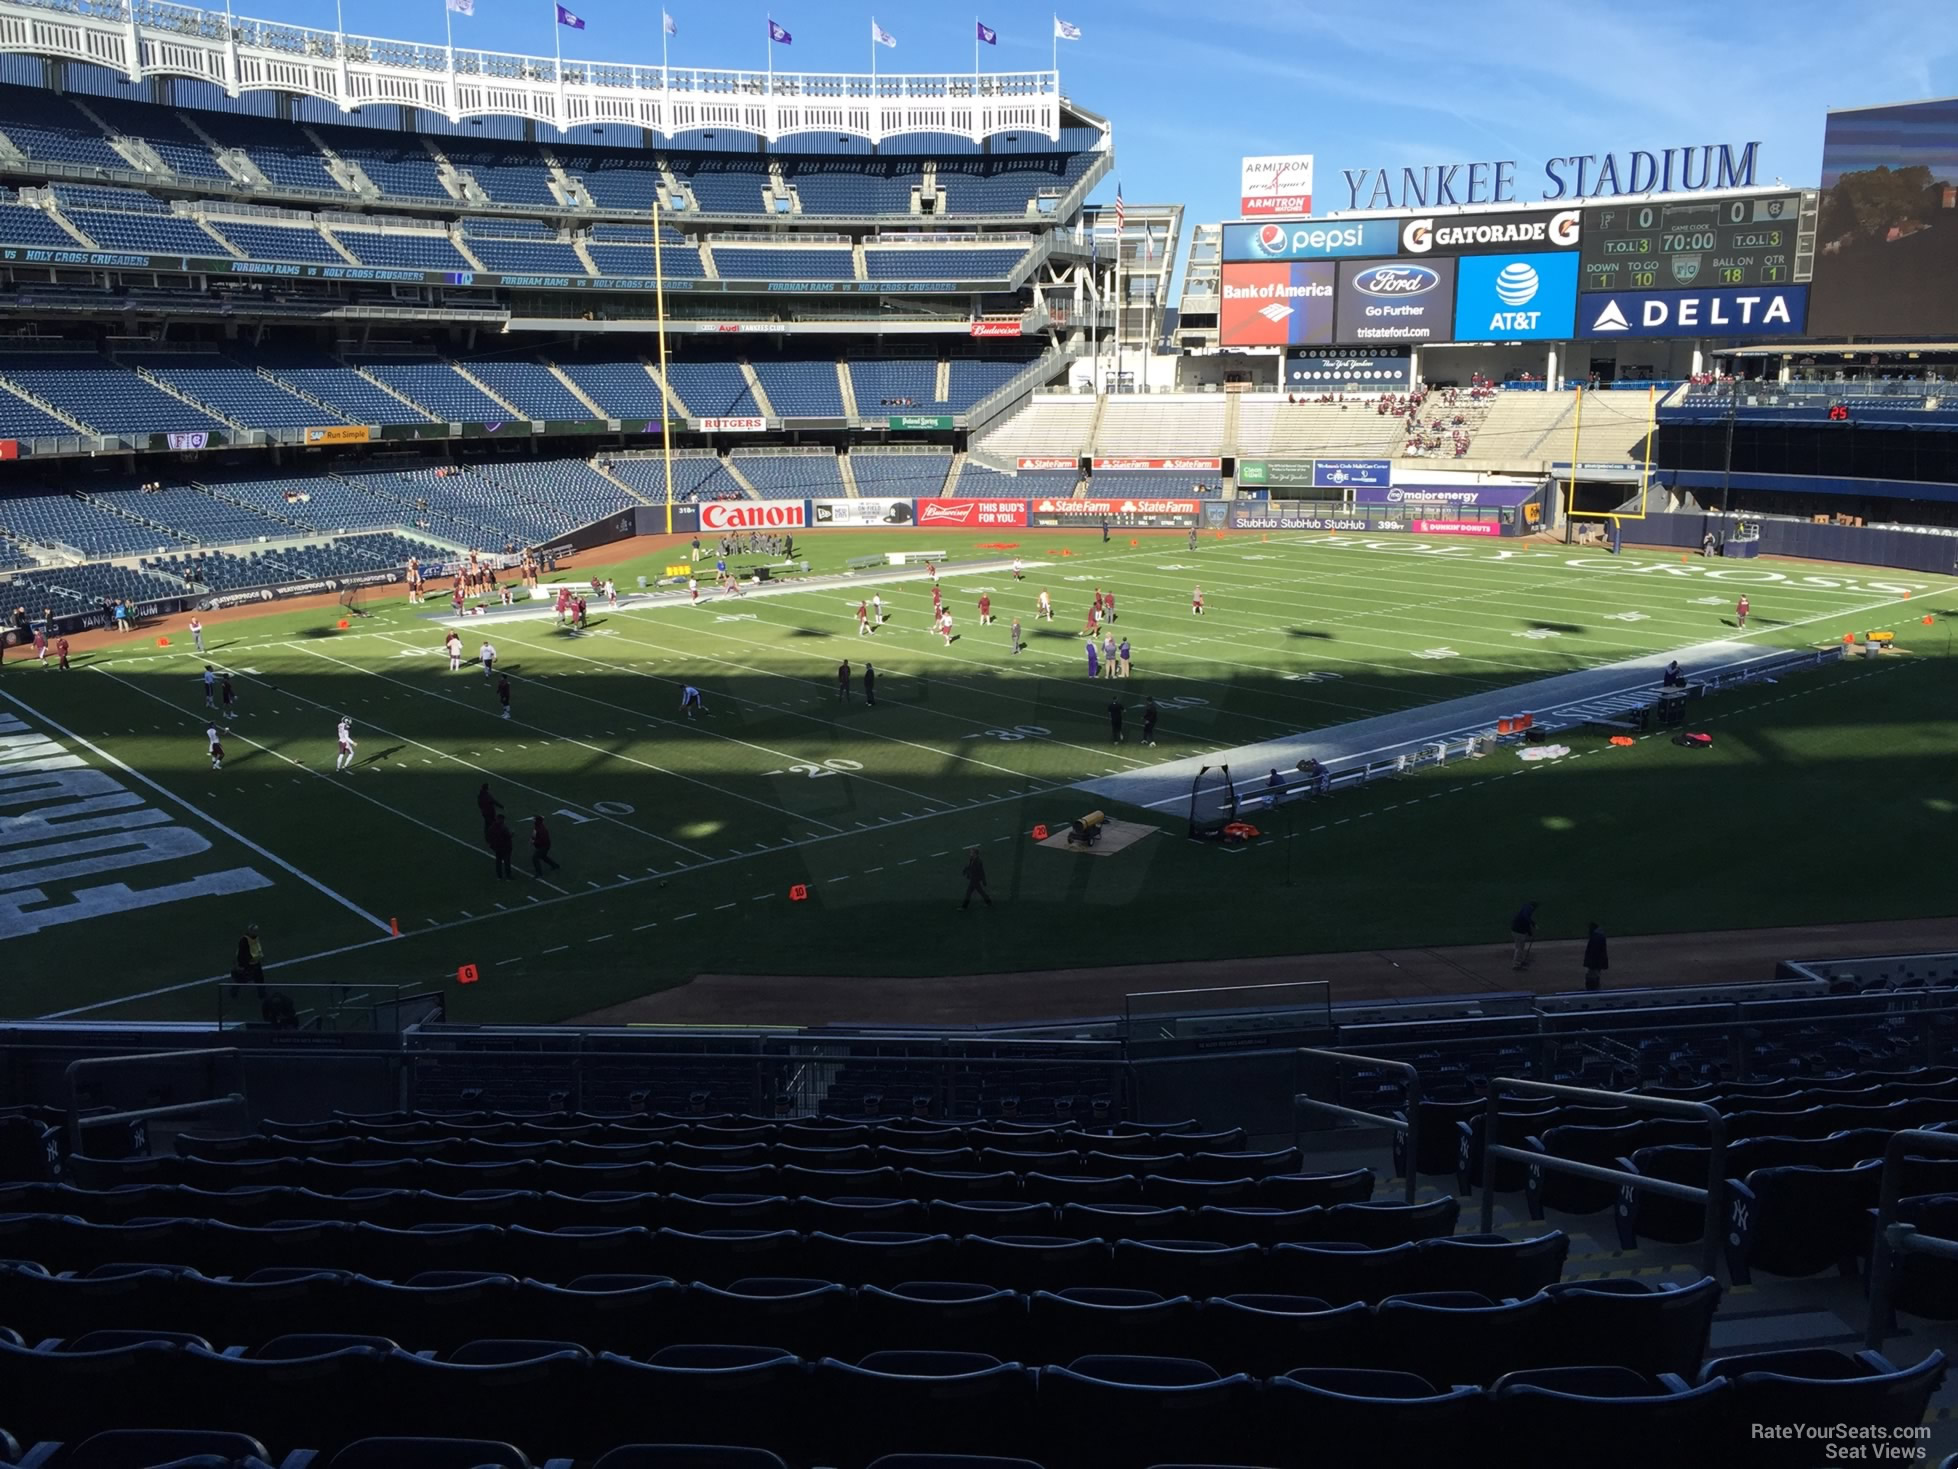 section 214a, row 12 seat view  for football - yankee stadium